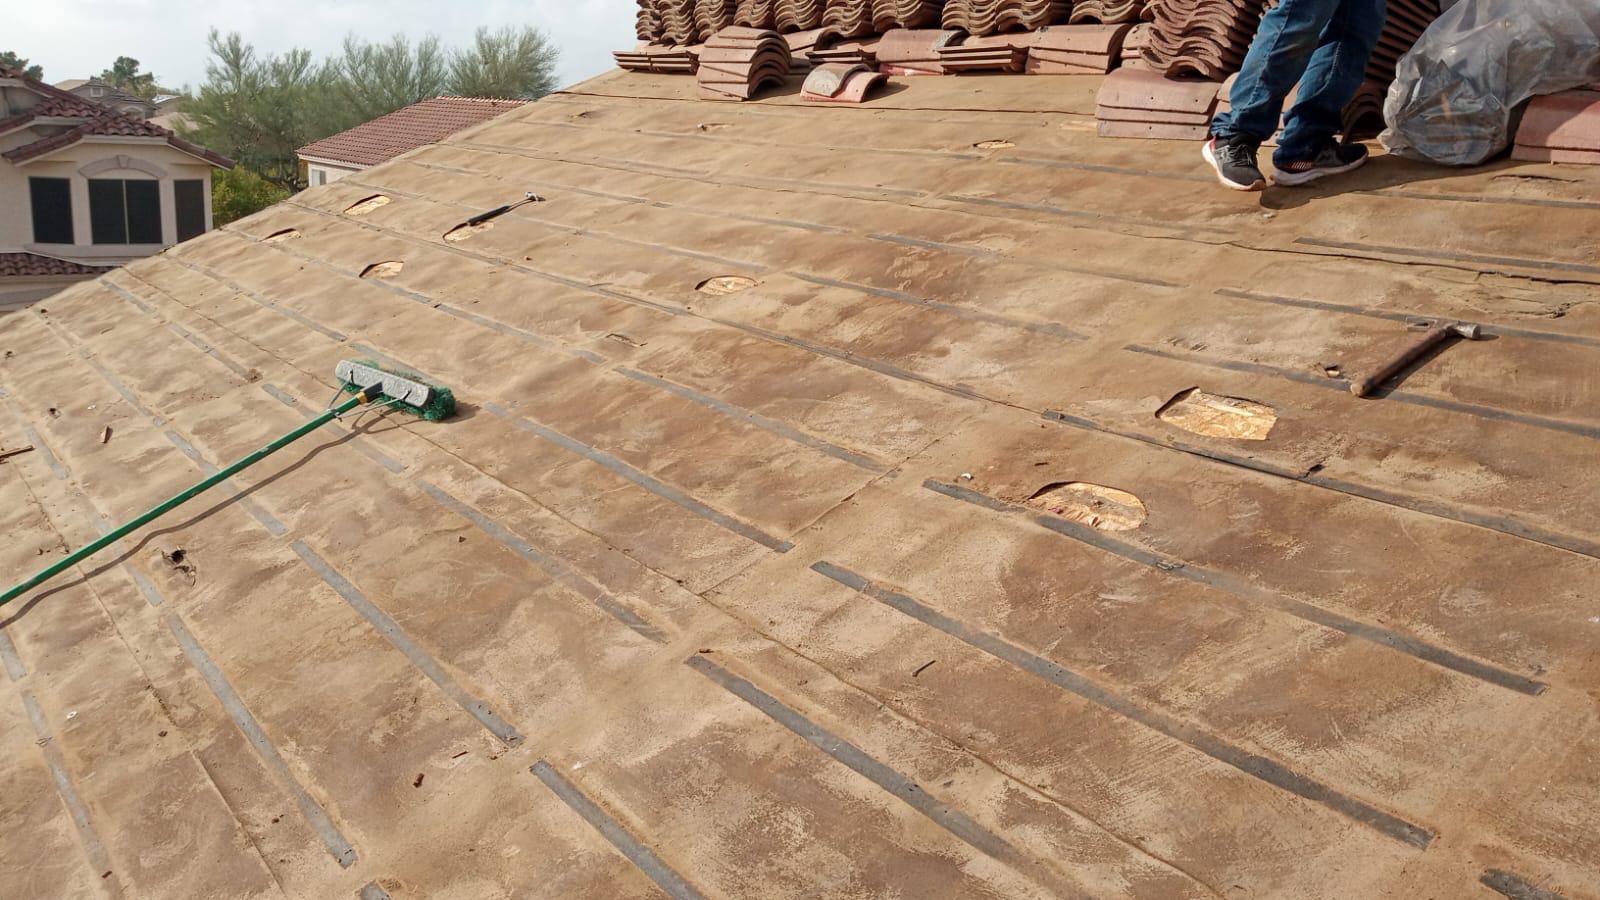 Behmer Roofing initiating a tile re-felt, ensuring structural integrity for a Desert Mountain home.